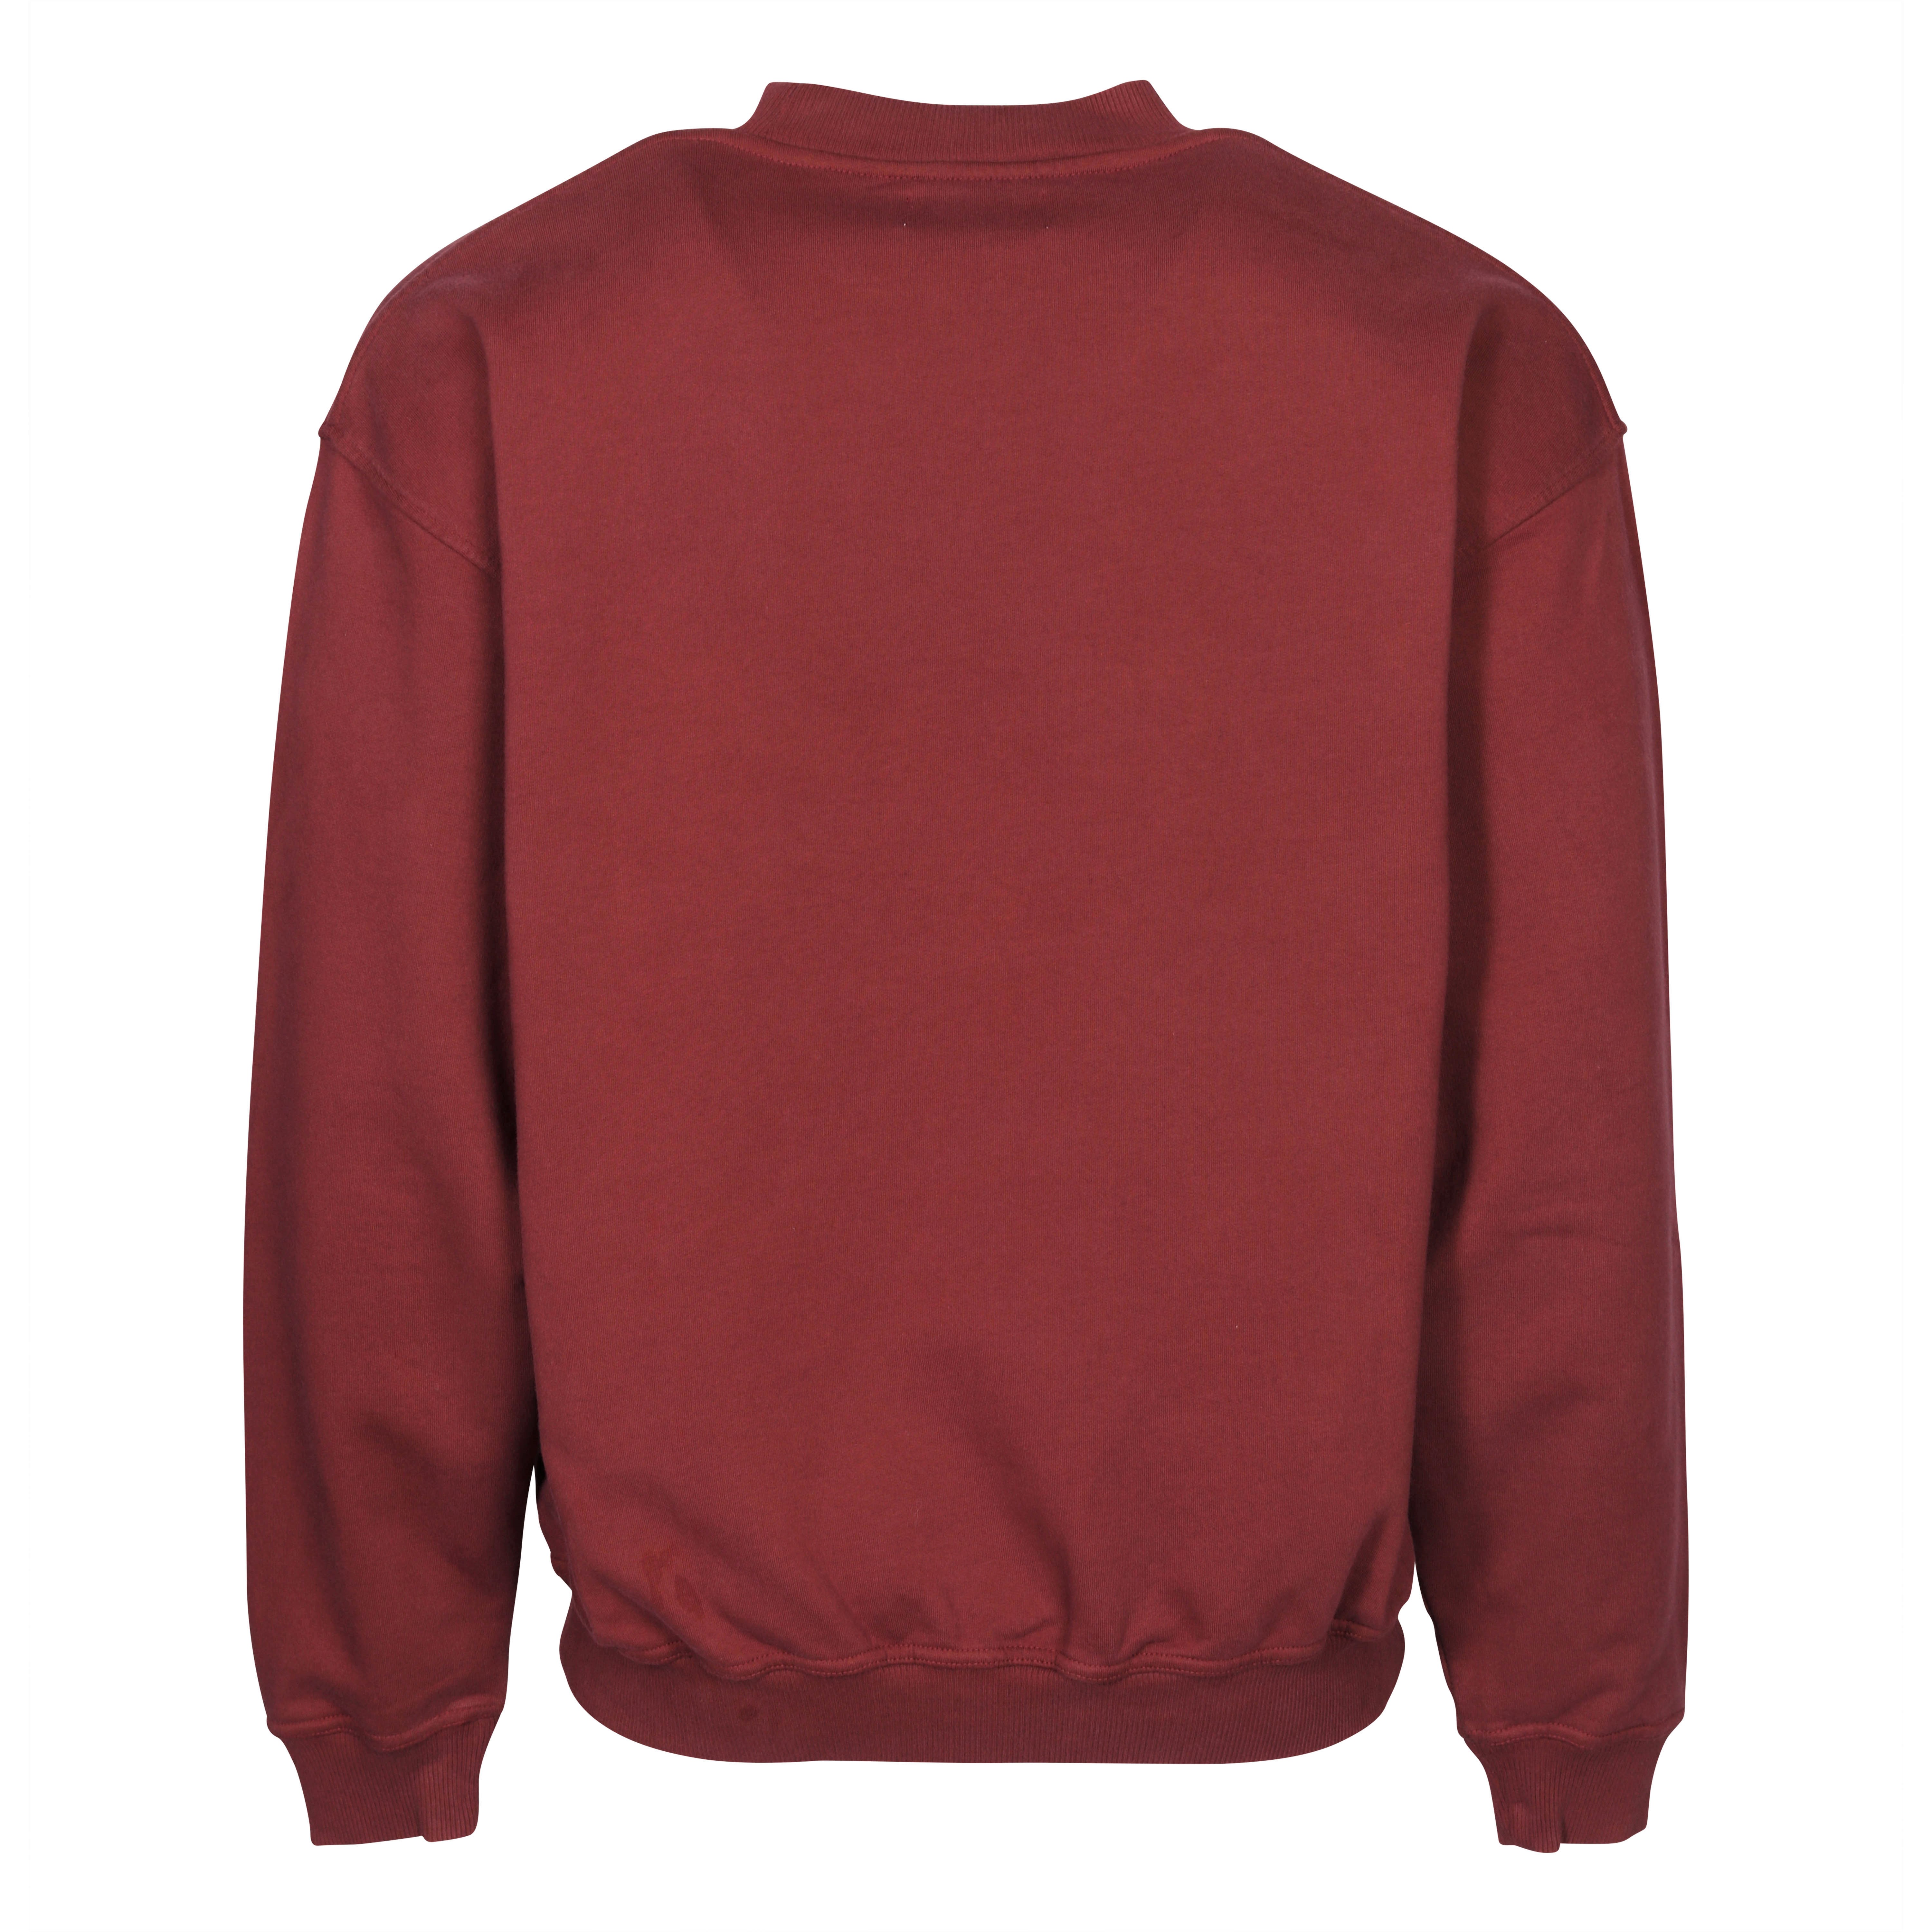 Represent Blank Sweater in Vintage Red